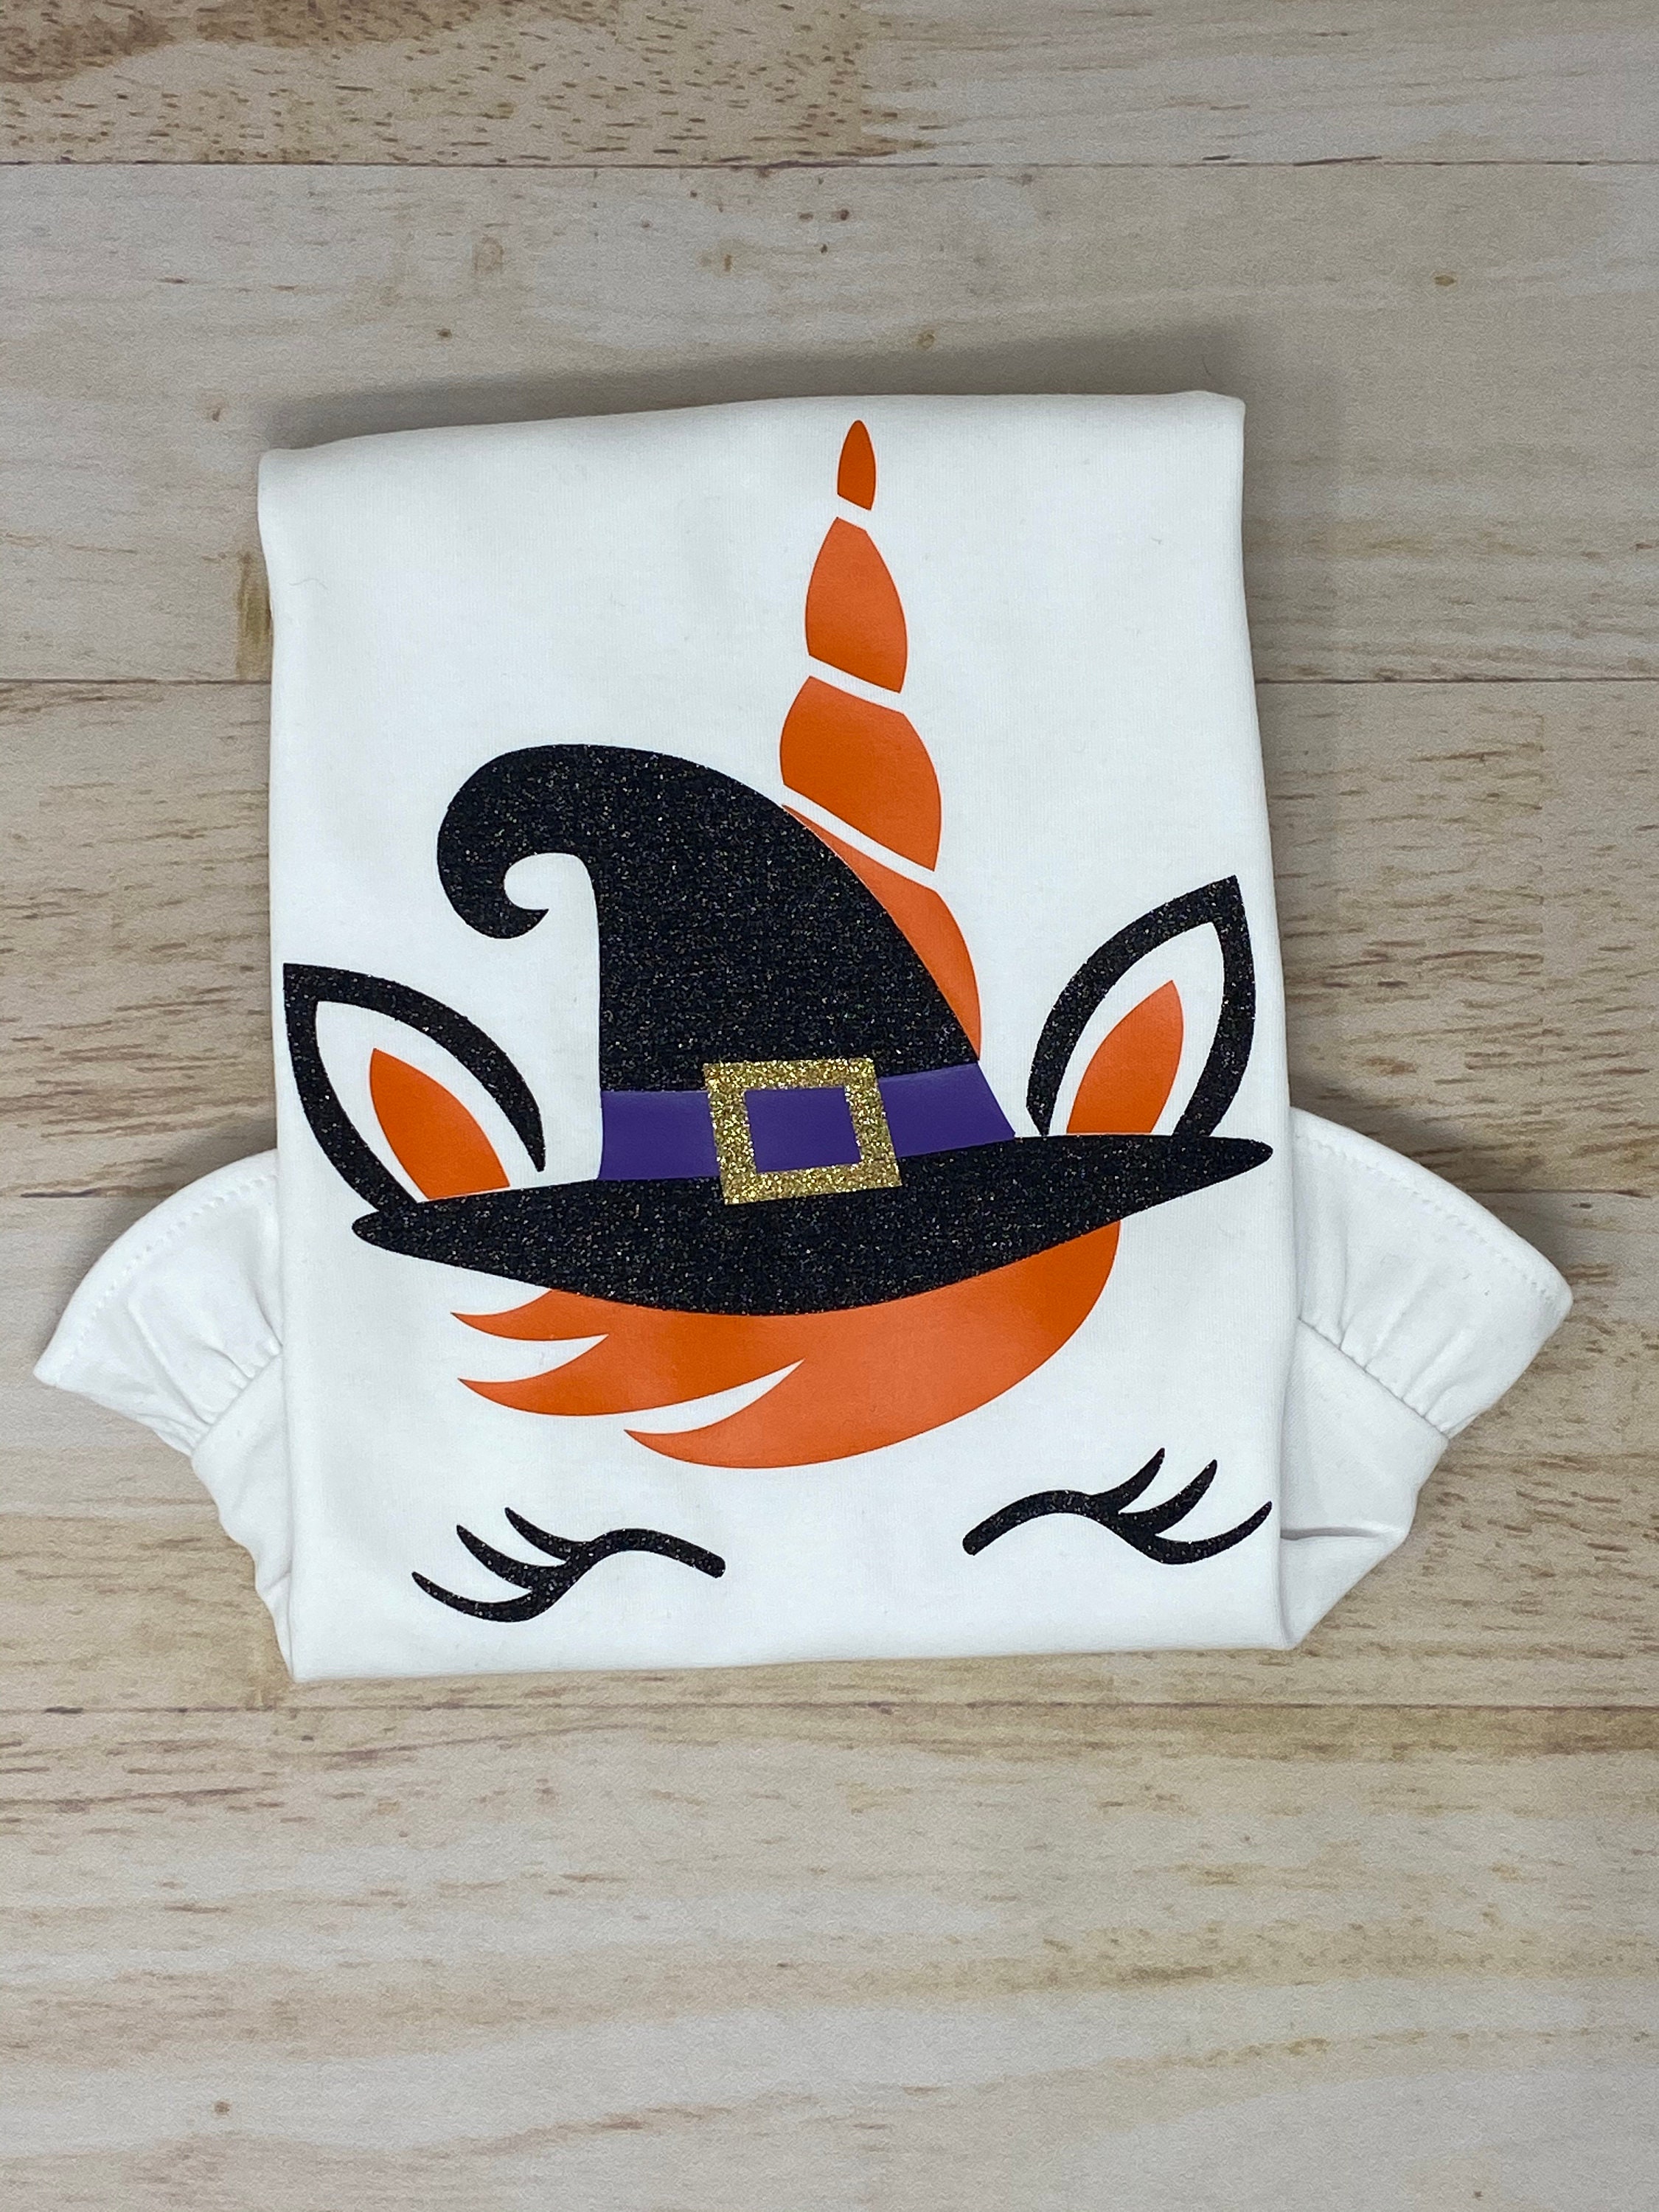 Discover Unicorn Witch Halloween Shirt S, Girl's Halloween Shirt, Girl's Unicorn Witch Shirt, HTV Shirt